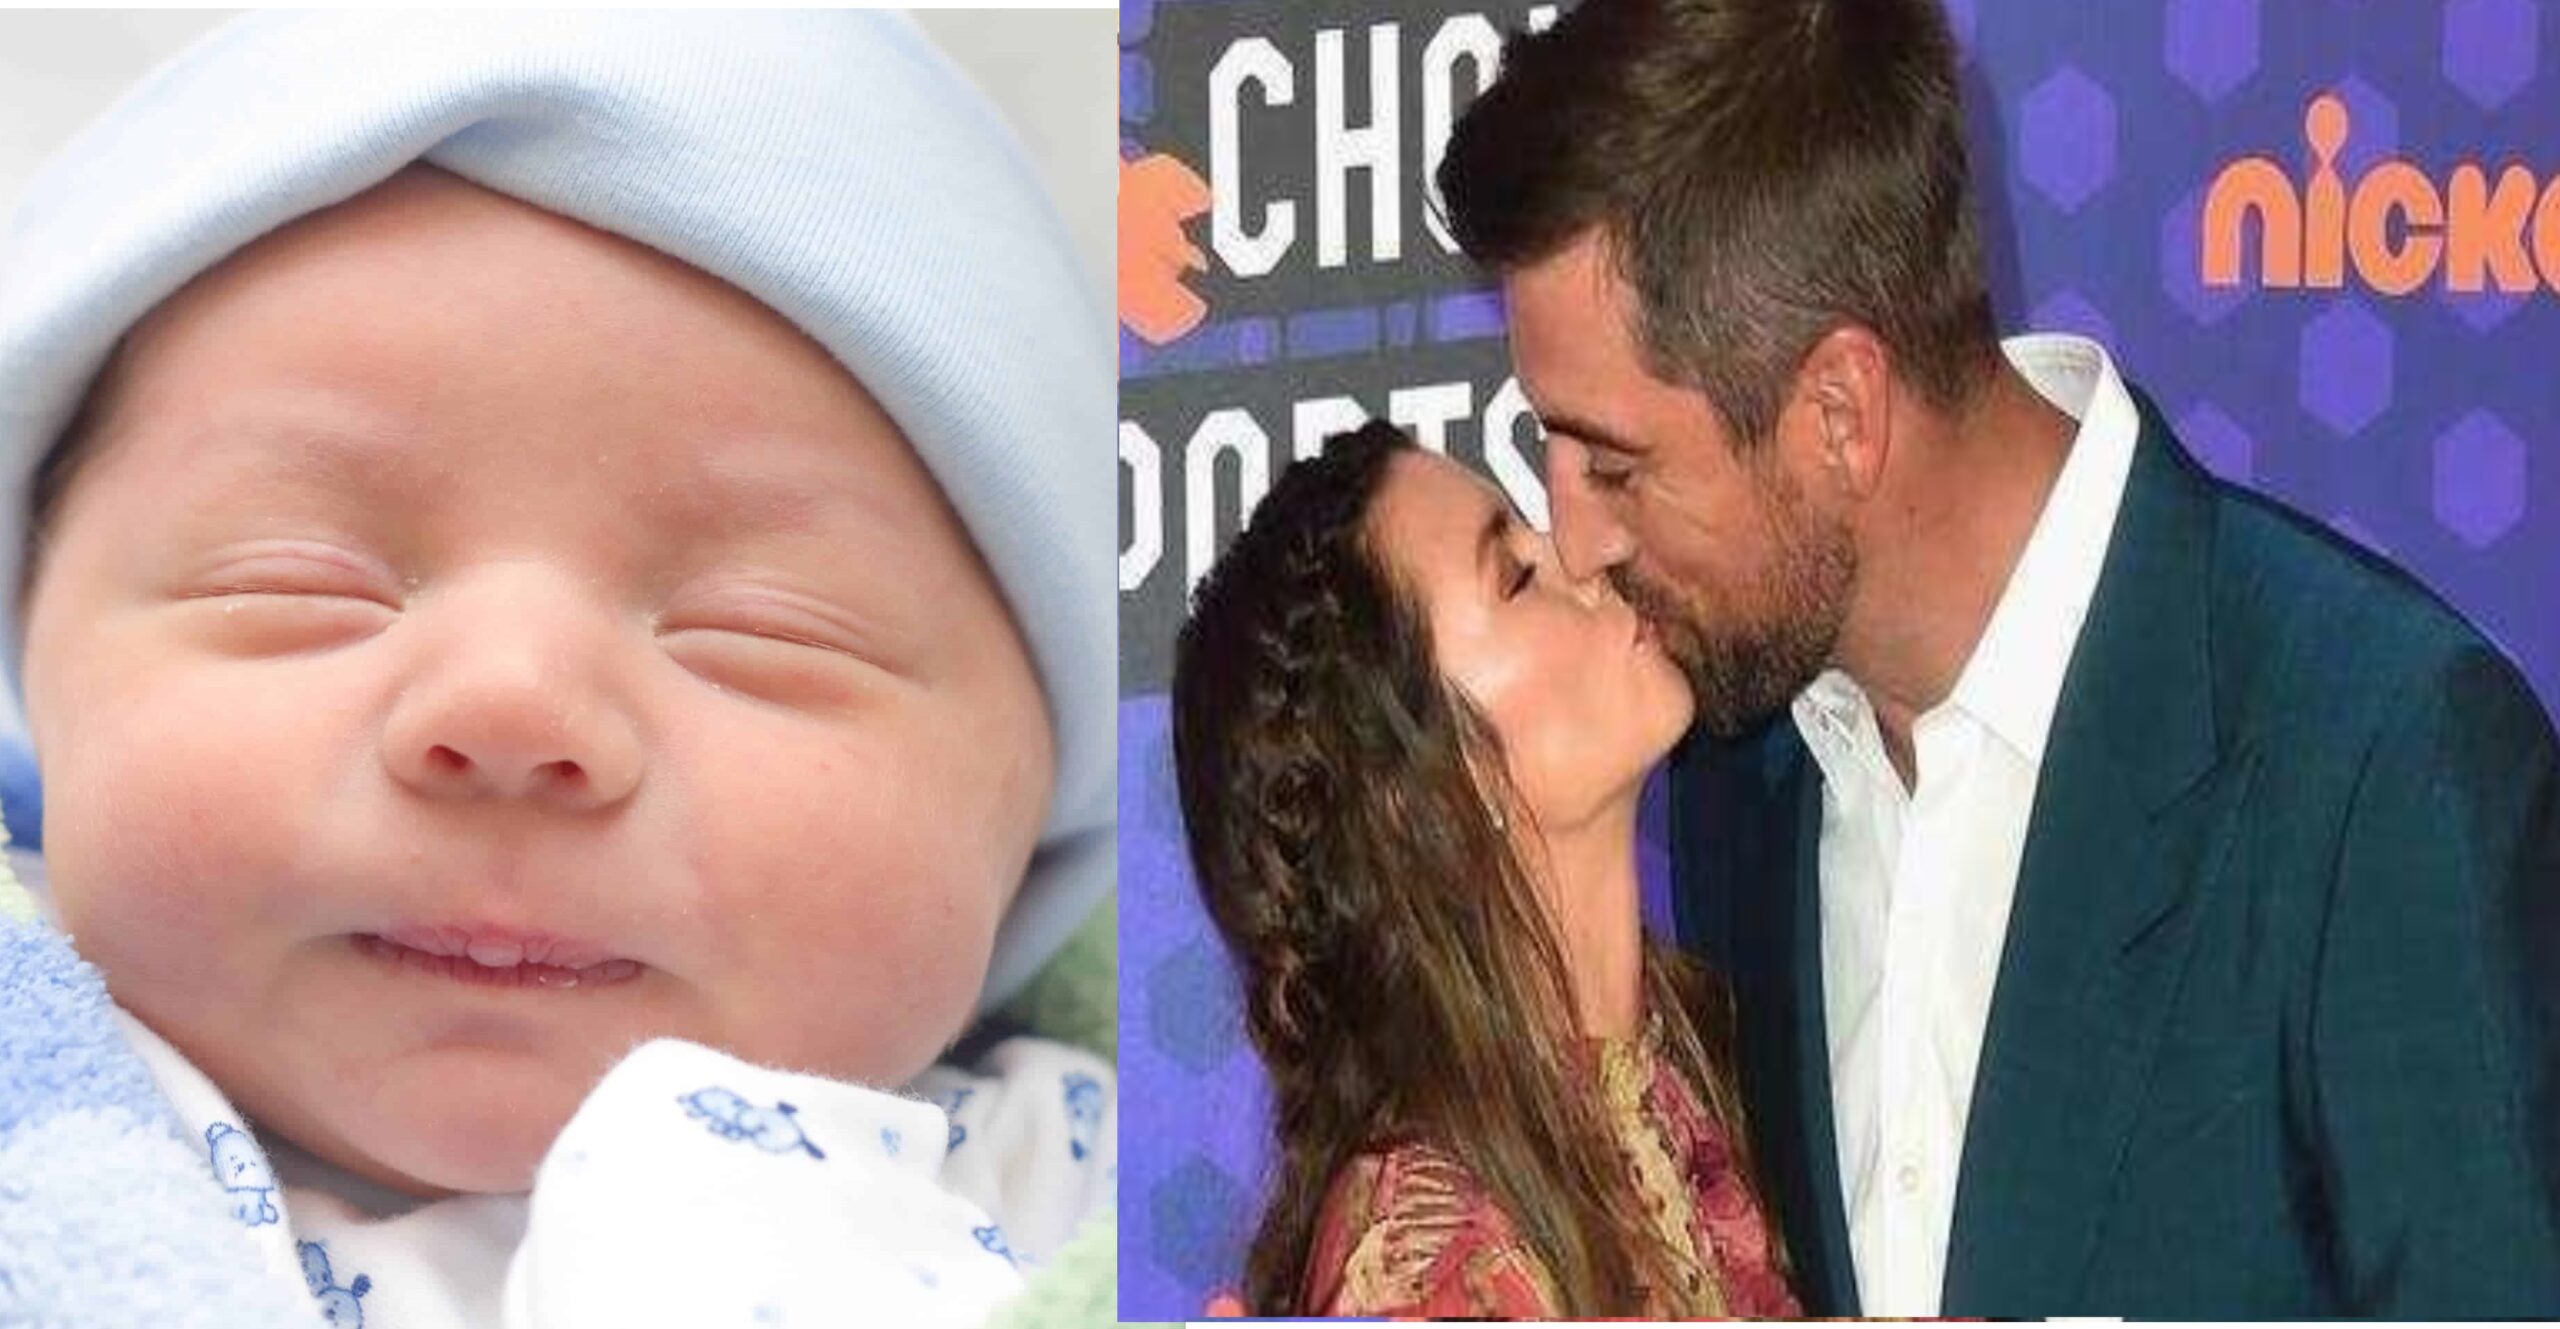 Christmas Miracle for Jets Quarterback Aaron Rodgers as he Welcomes First Child Just in Time for the Holidays